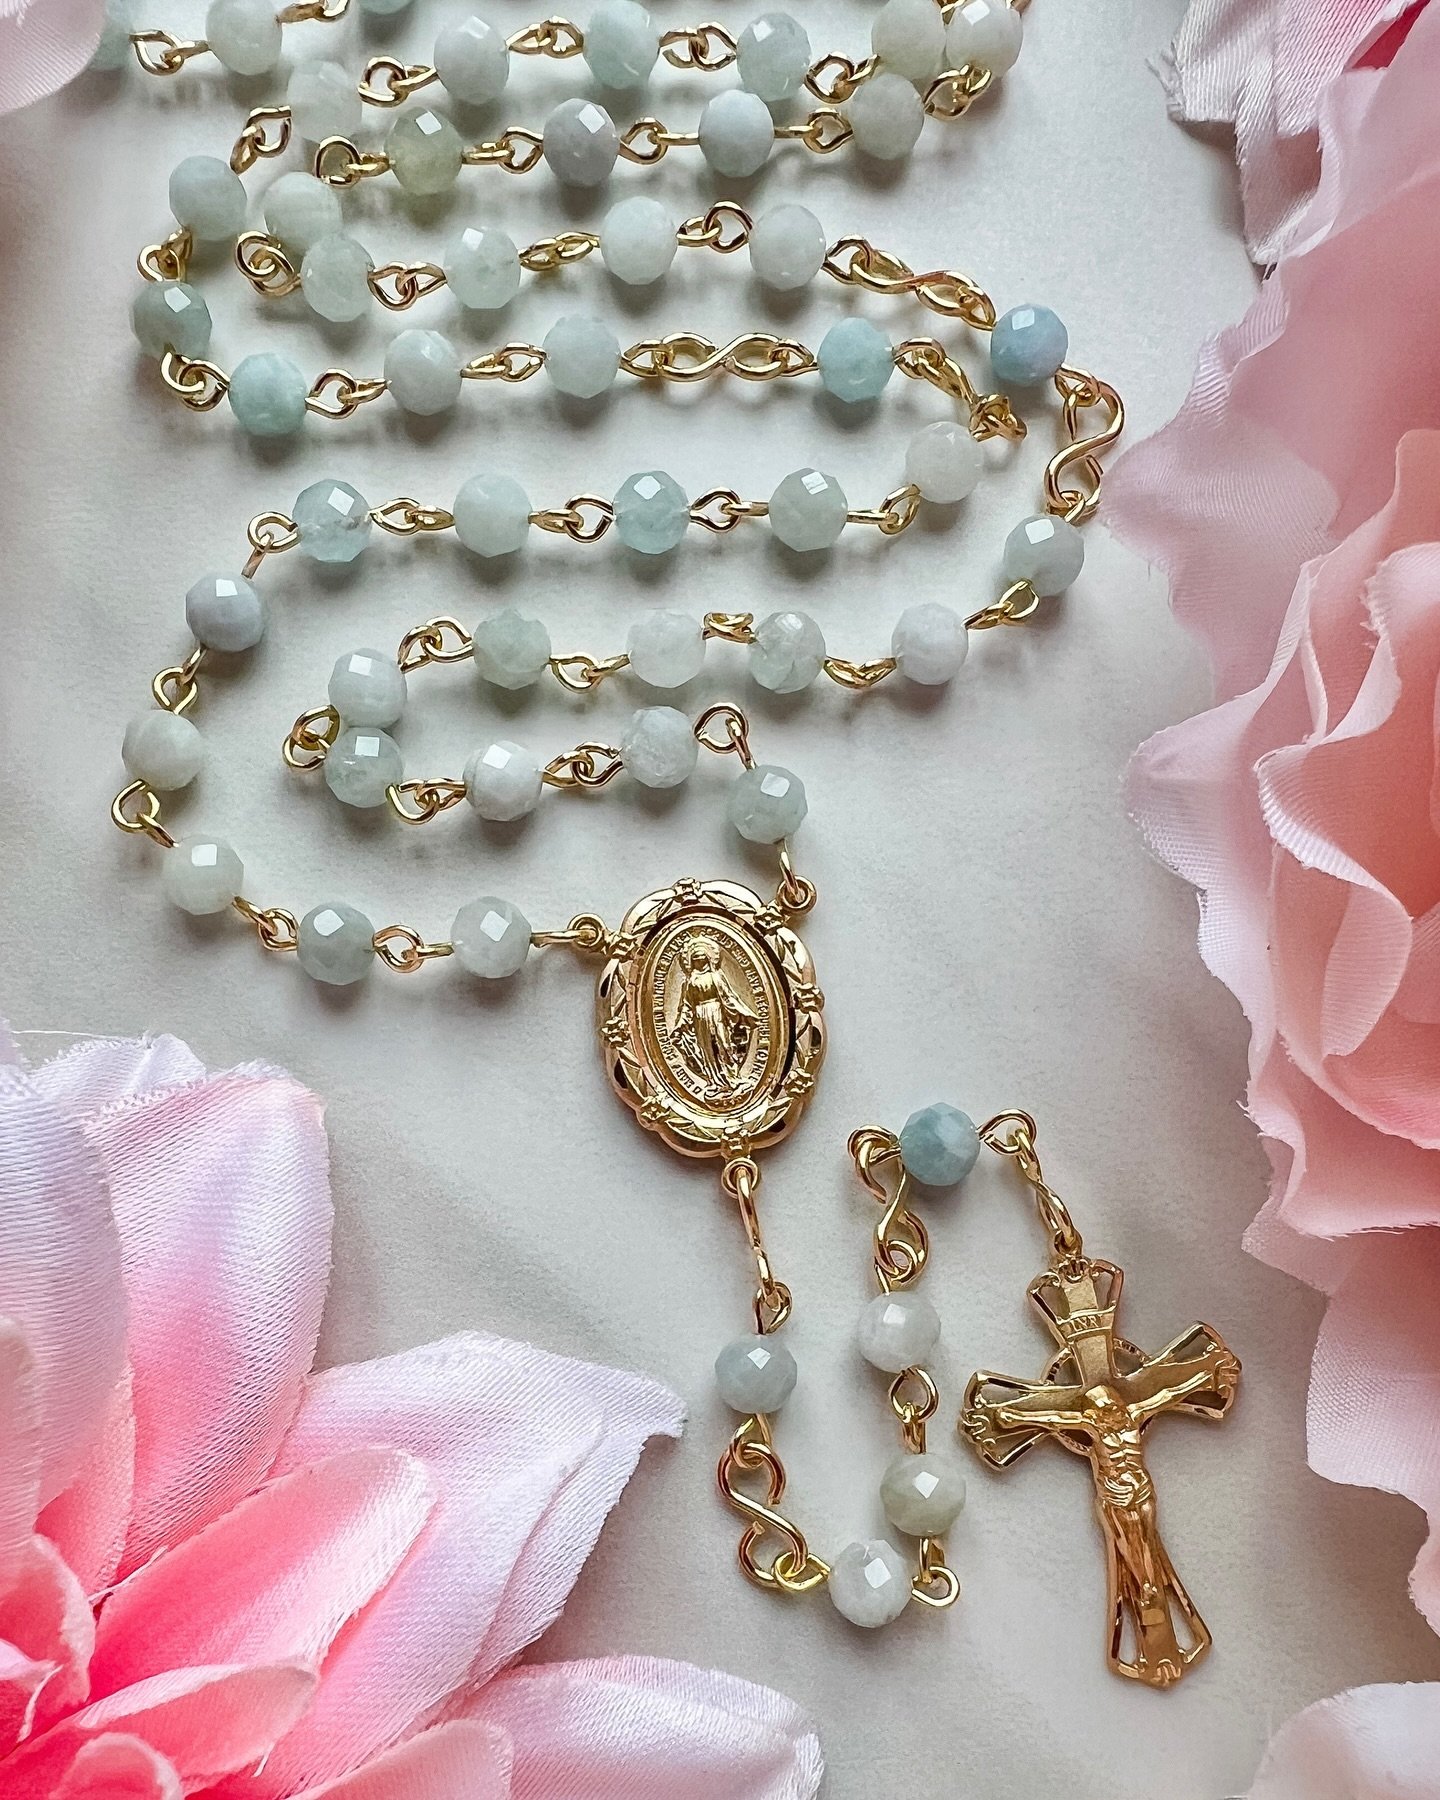 14k gold and aquamarine 💛

Aquamarine is the March birthstone! These faceted beads catch the light and have a lovely pale blue color. The Miraculous Medal with floral border is so detailed and beautiful, and pairs well with the crucifix and beads. 1